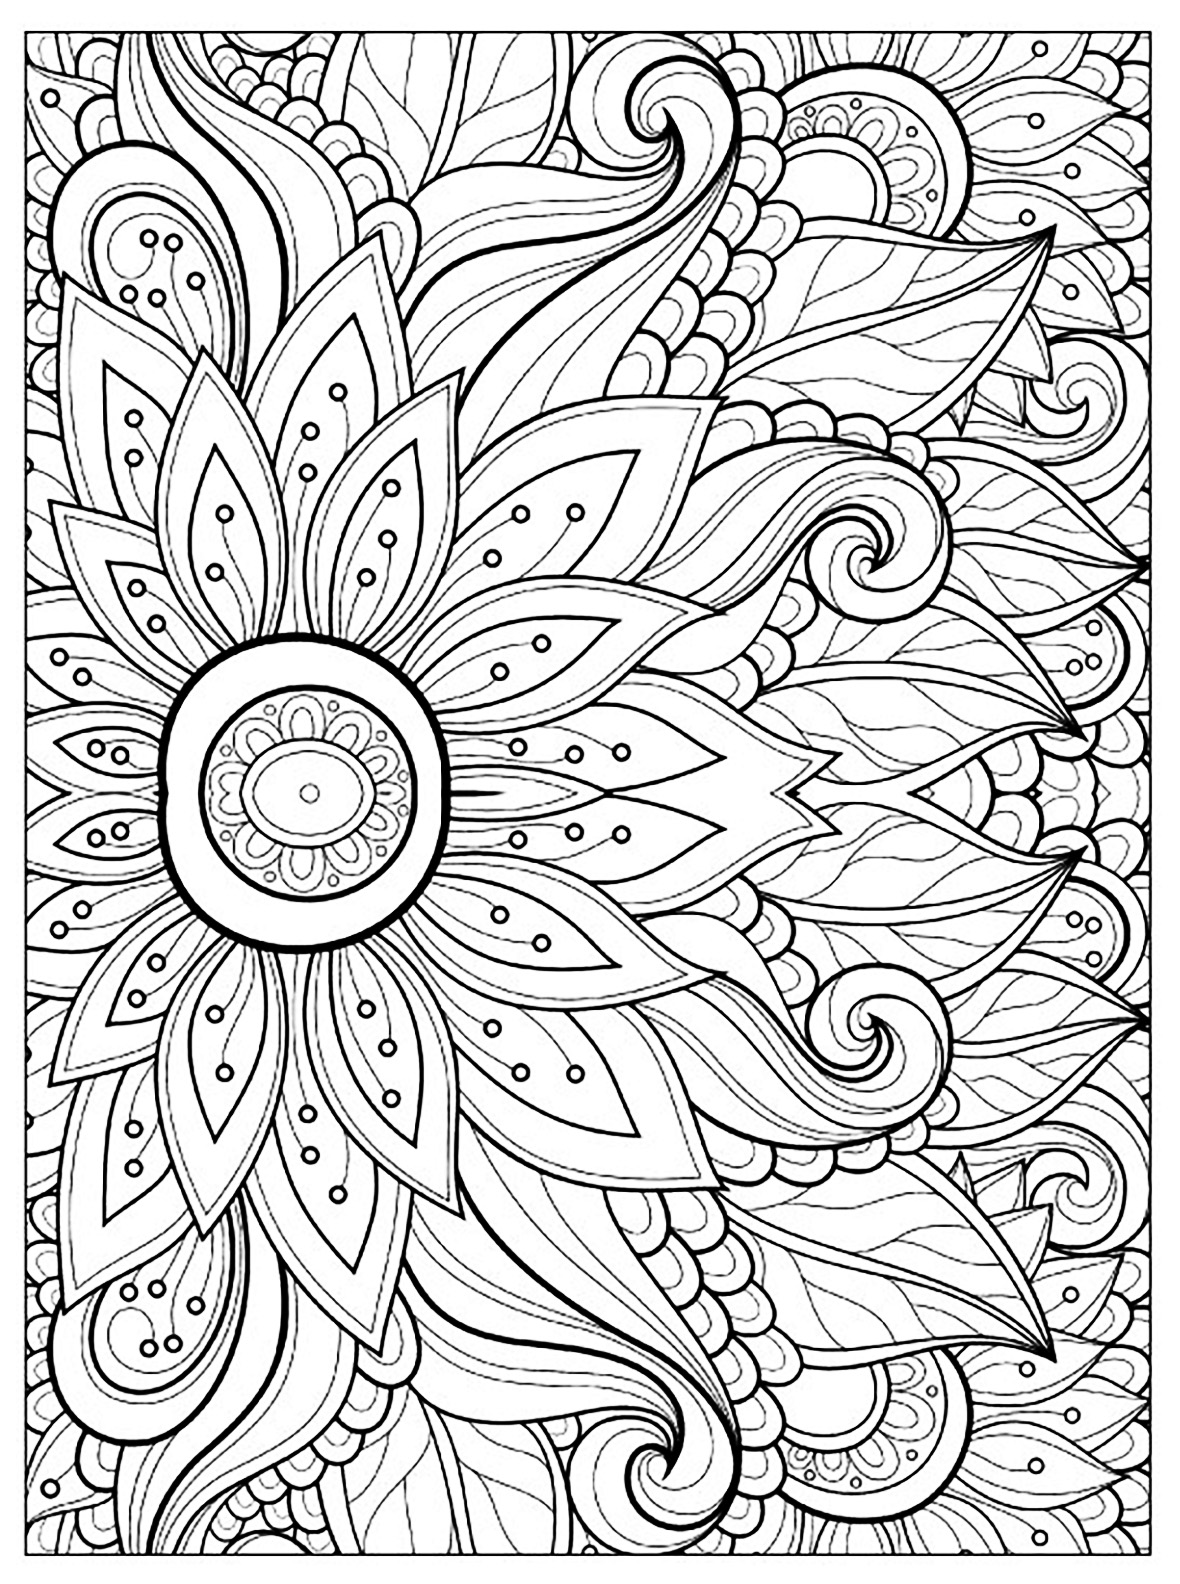 Flower with multiple petals - Flowers Kids Coloring Pages